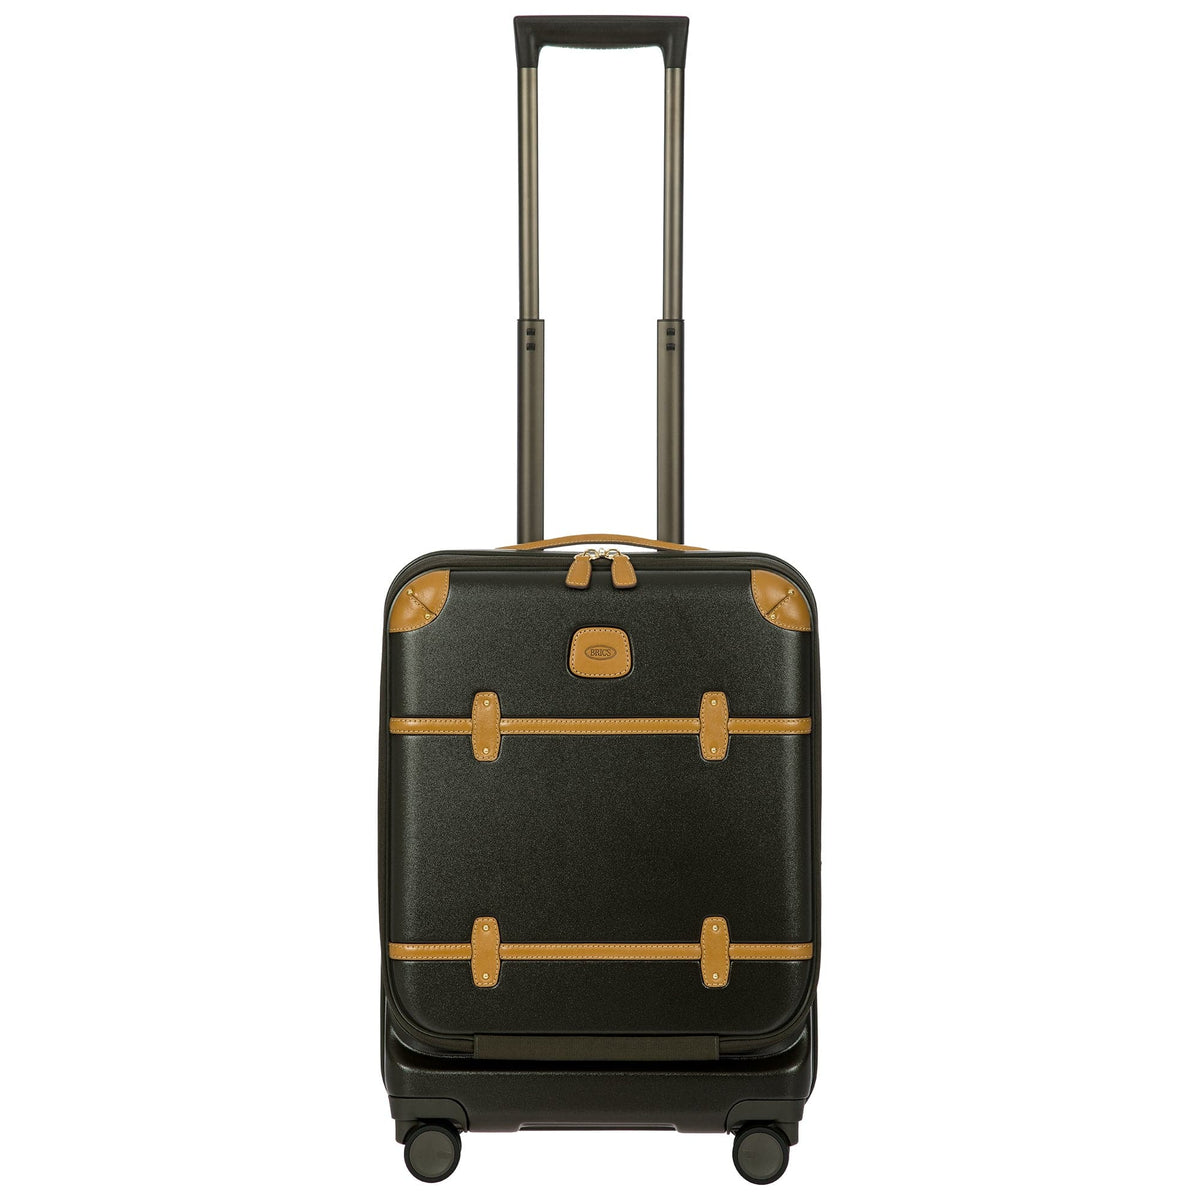 Bric's Bellagio 2.0 New 21" Spinner with Pocket Luggage